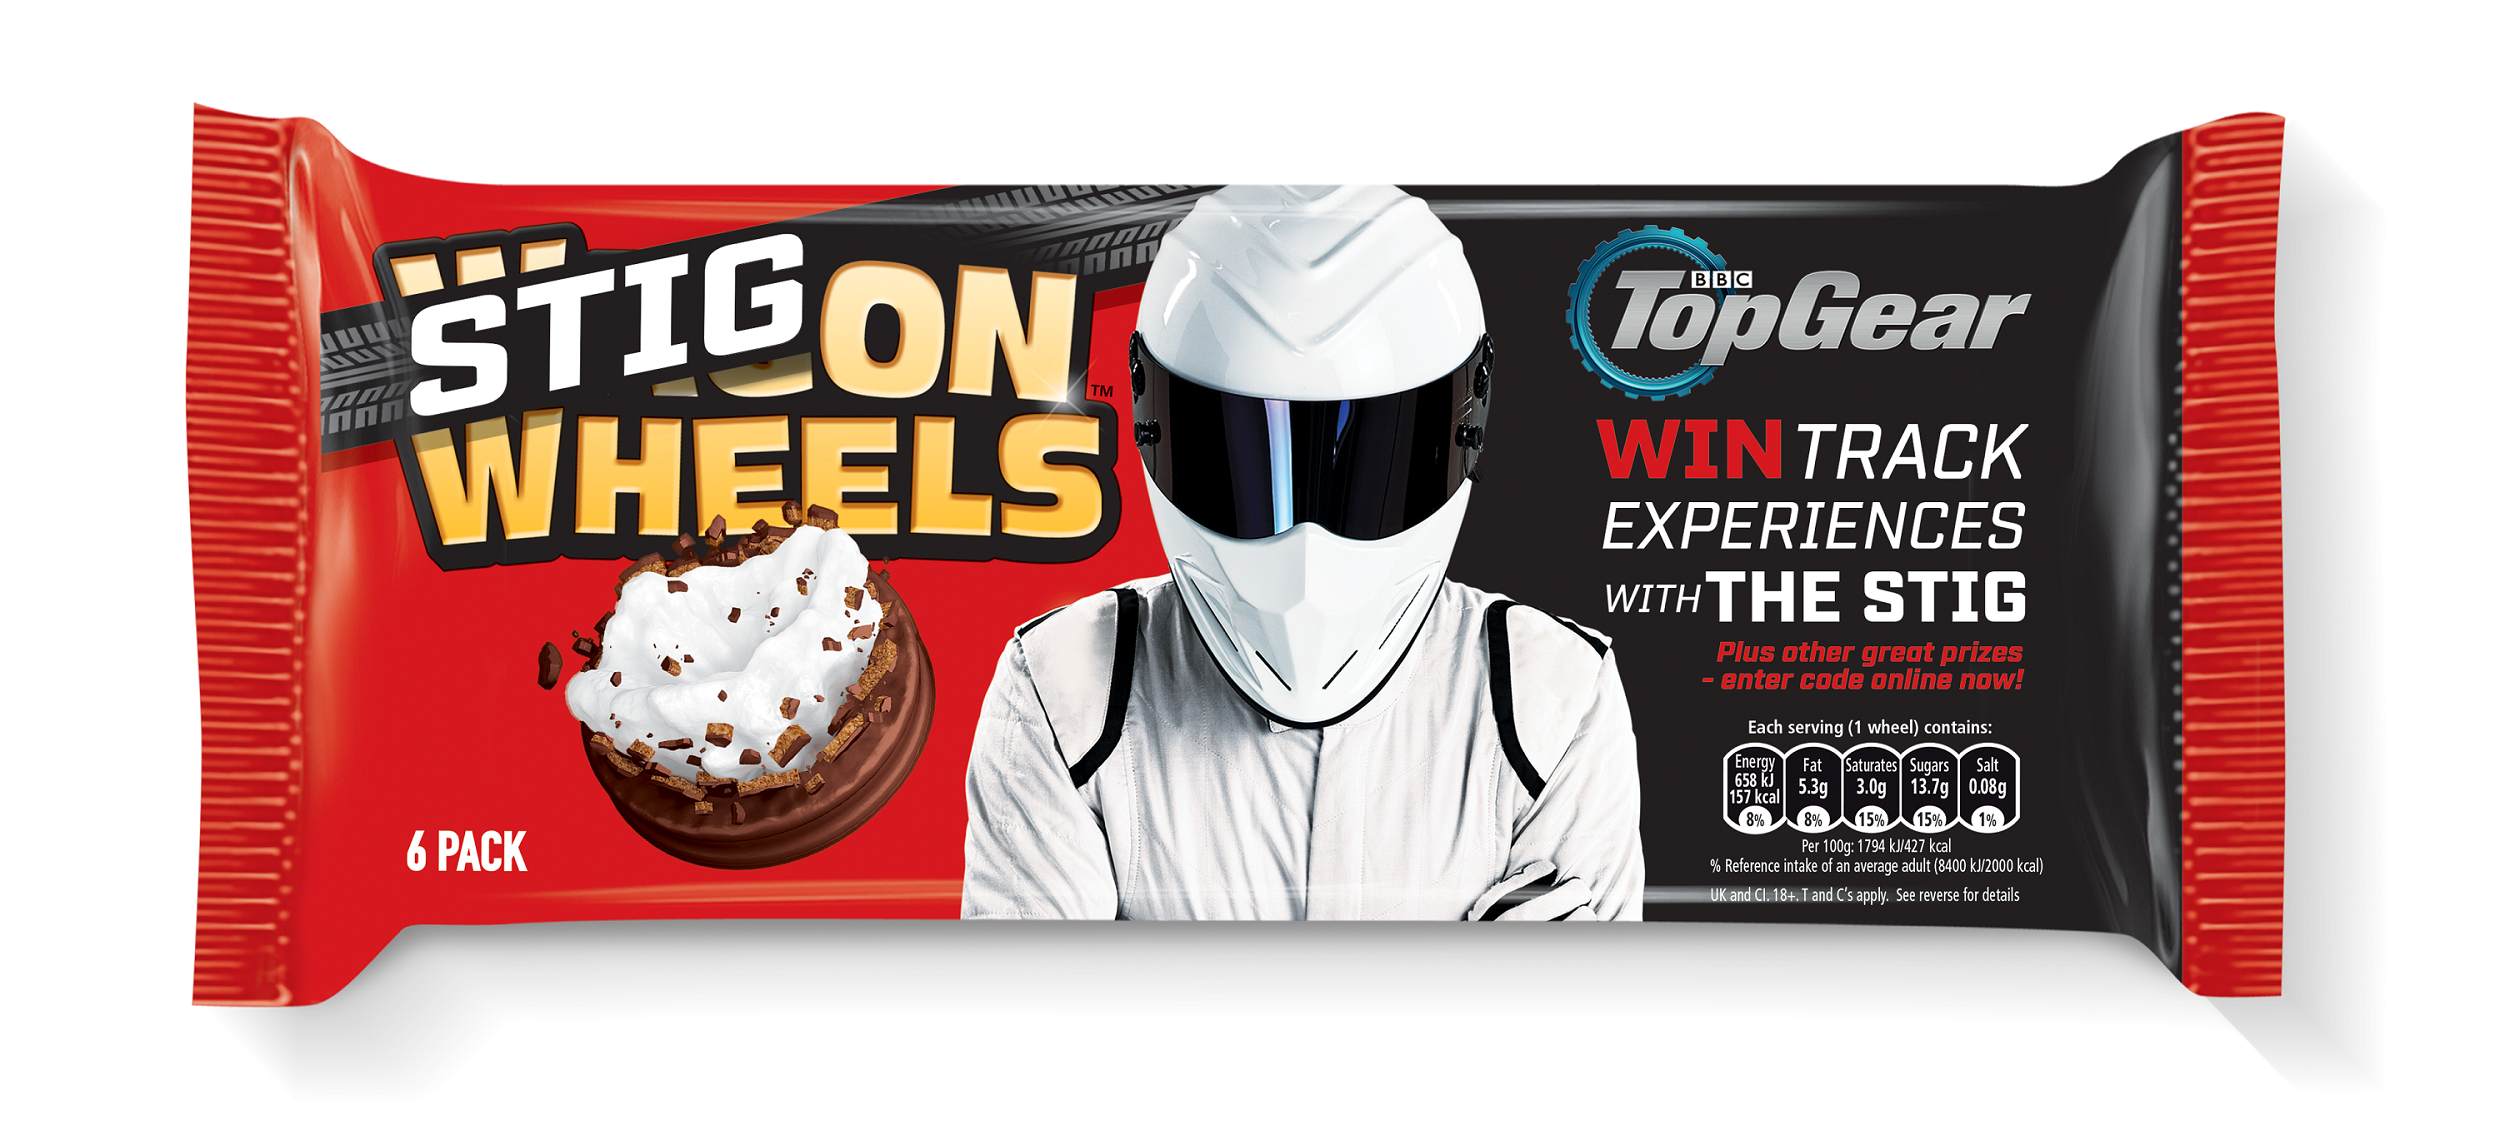 Wagon Wheels gears up for epic on-pack promotion with The Stig